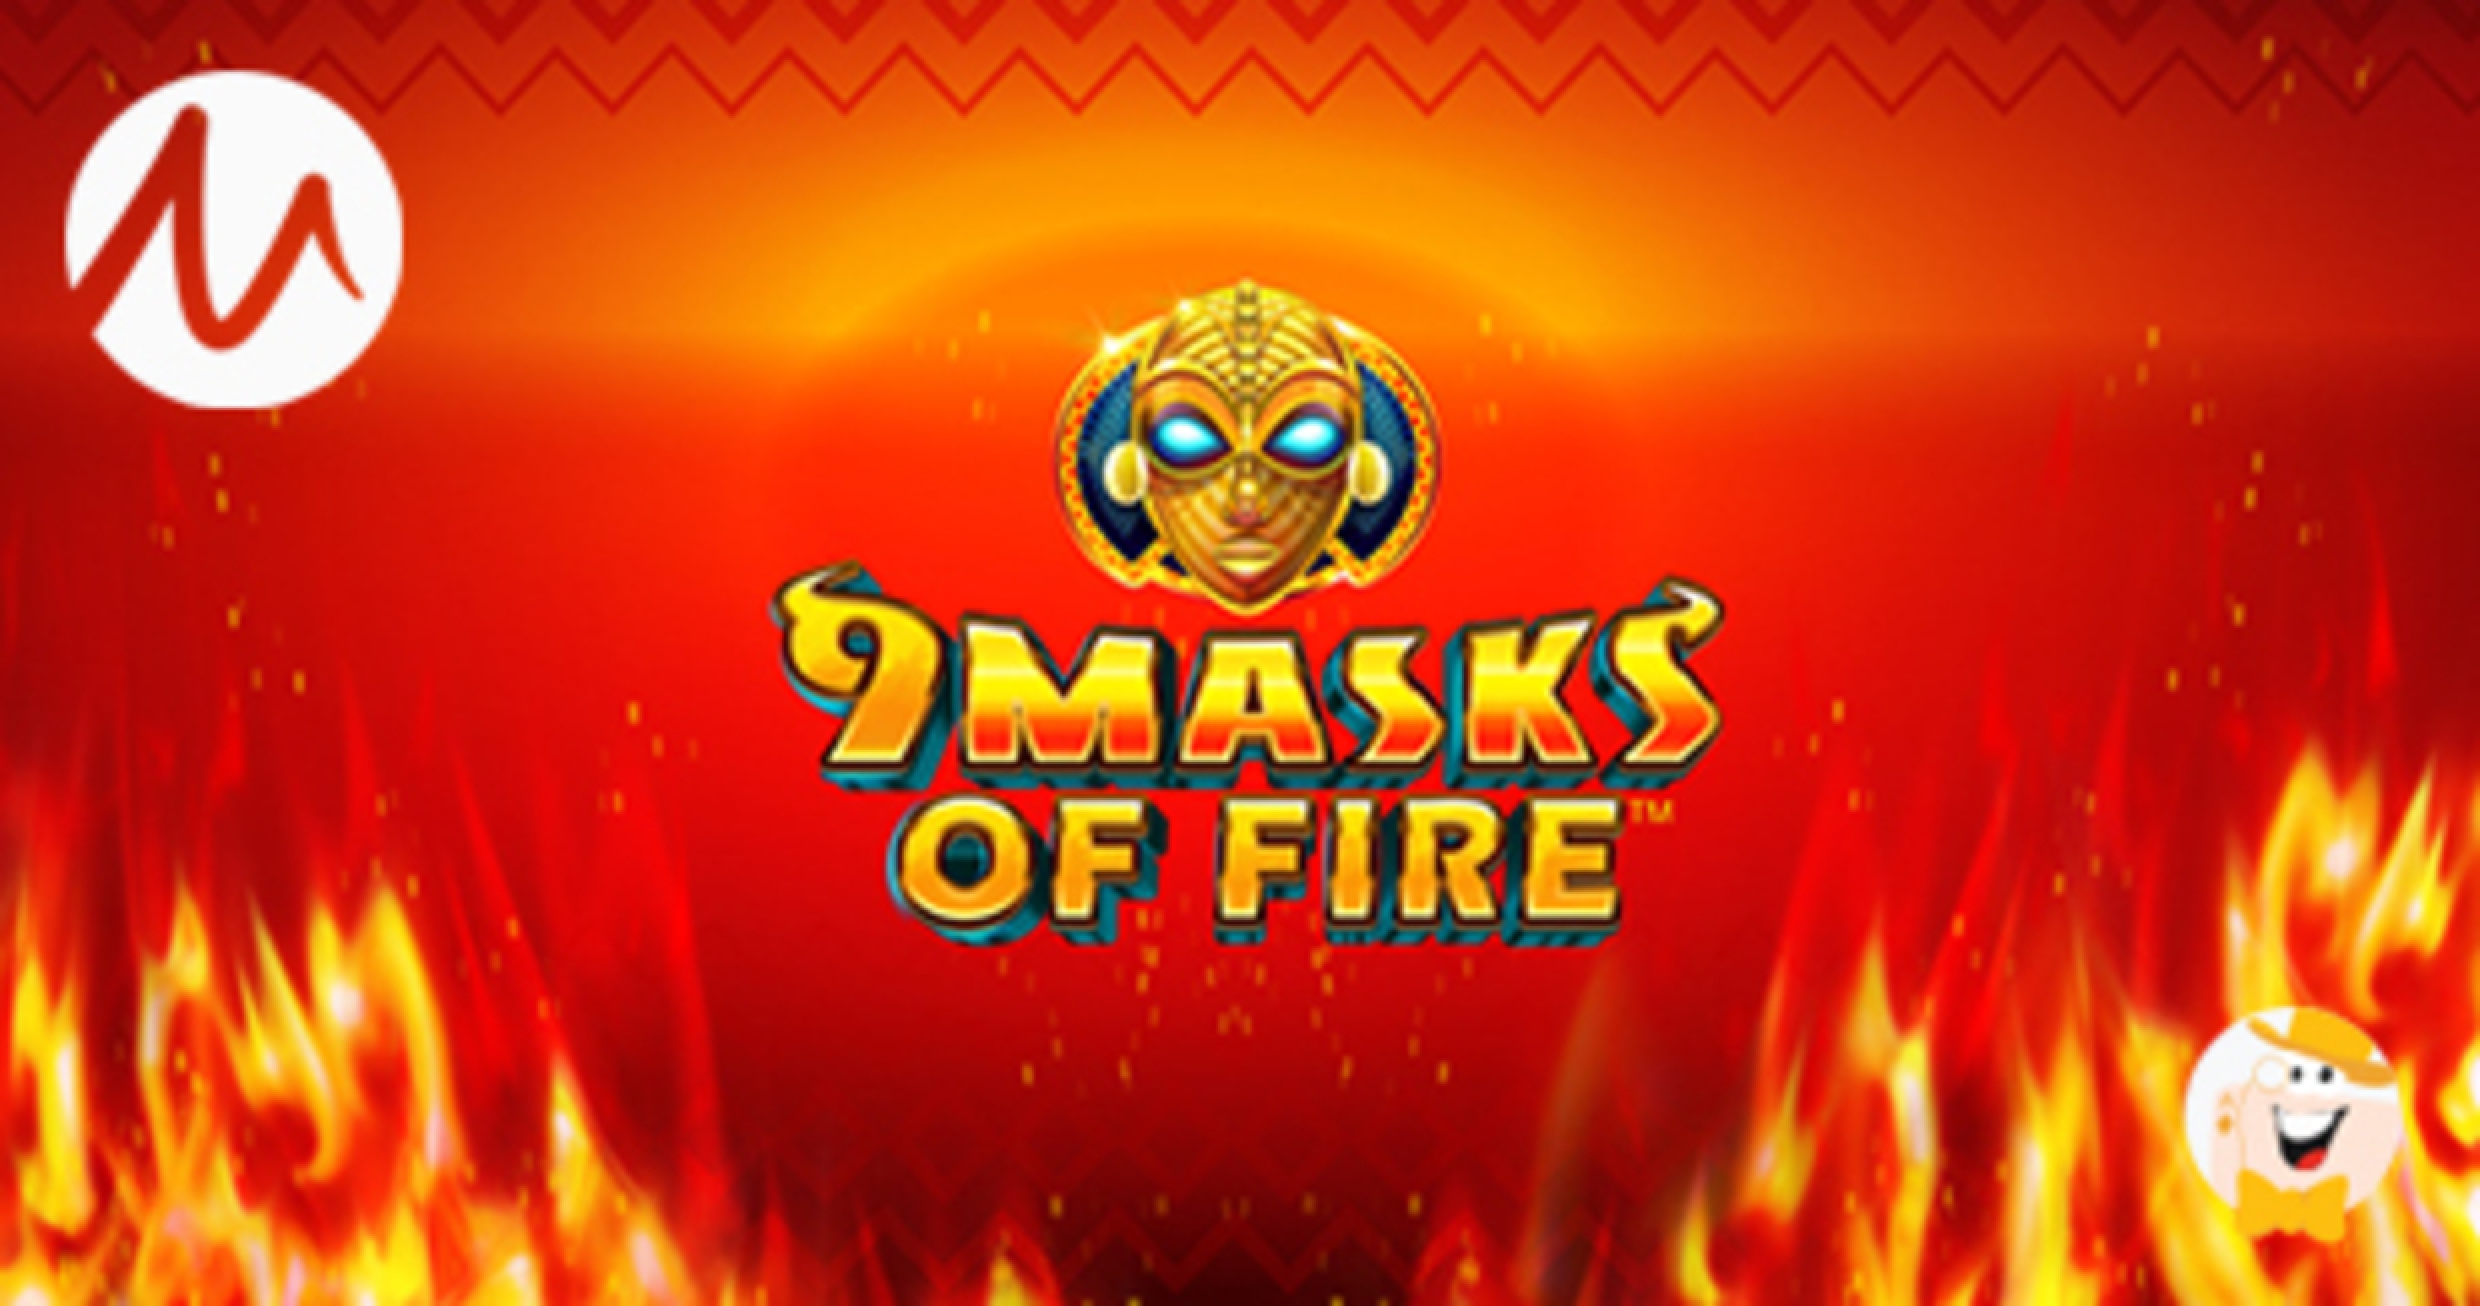 The 9 Masks Of Fire Online Slot Demo Game by Gameburger Studios